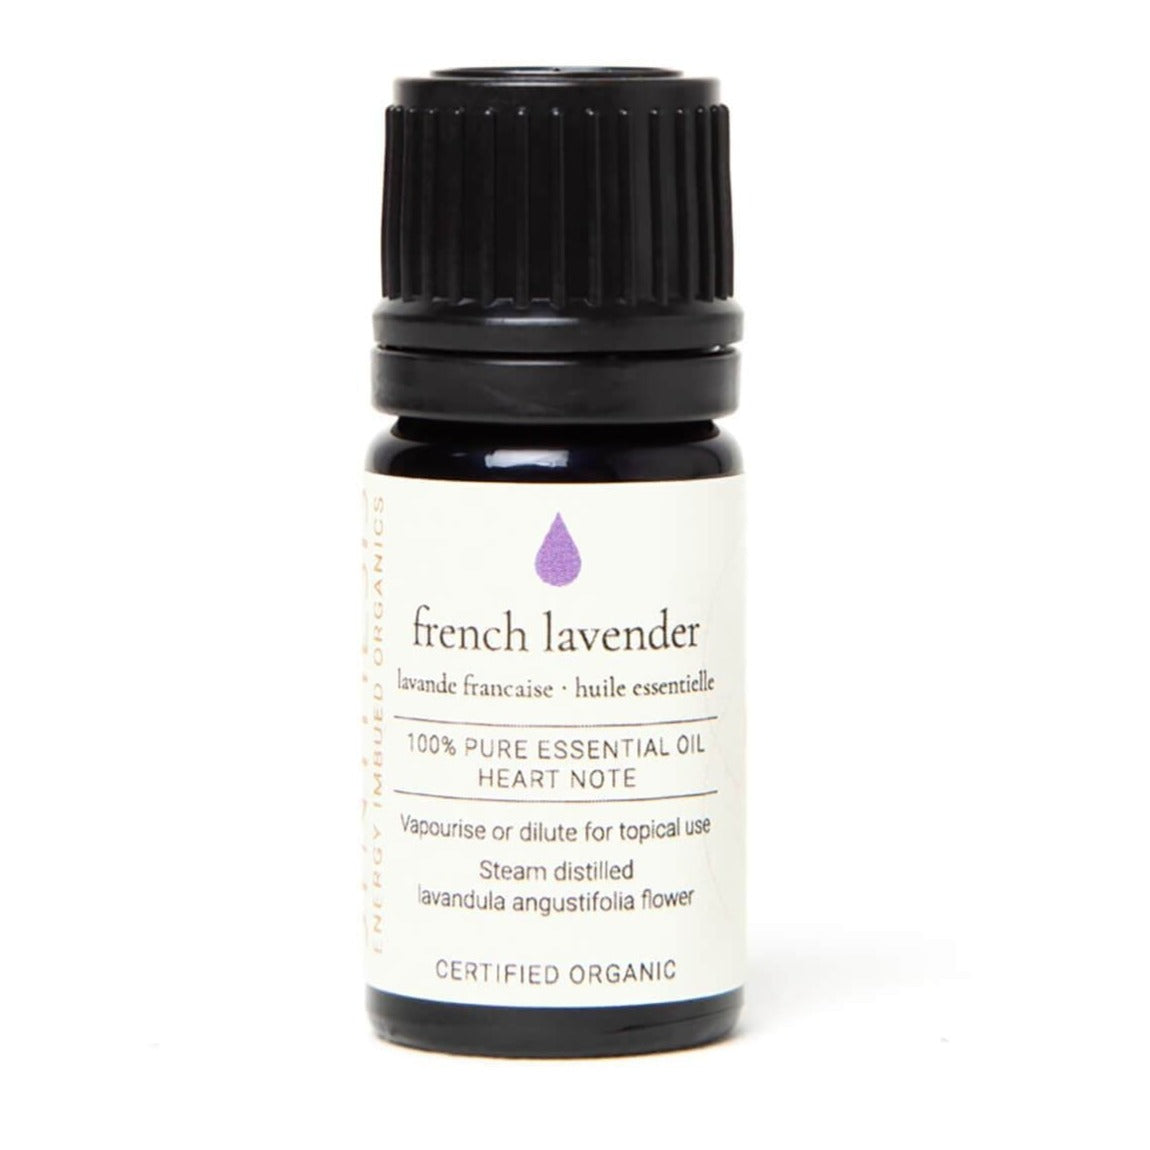 French Lavender Certified Organic Essential Oil aroma Synthesis Organics